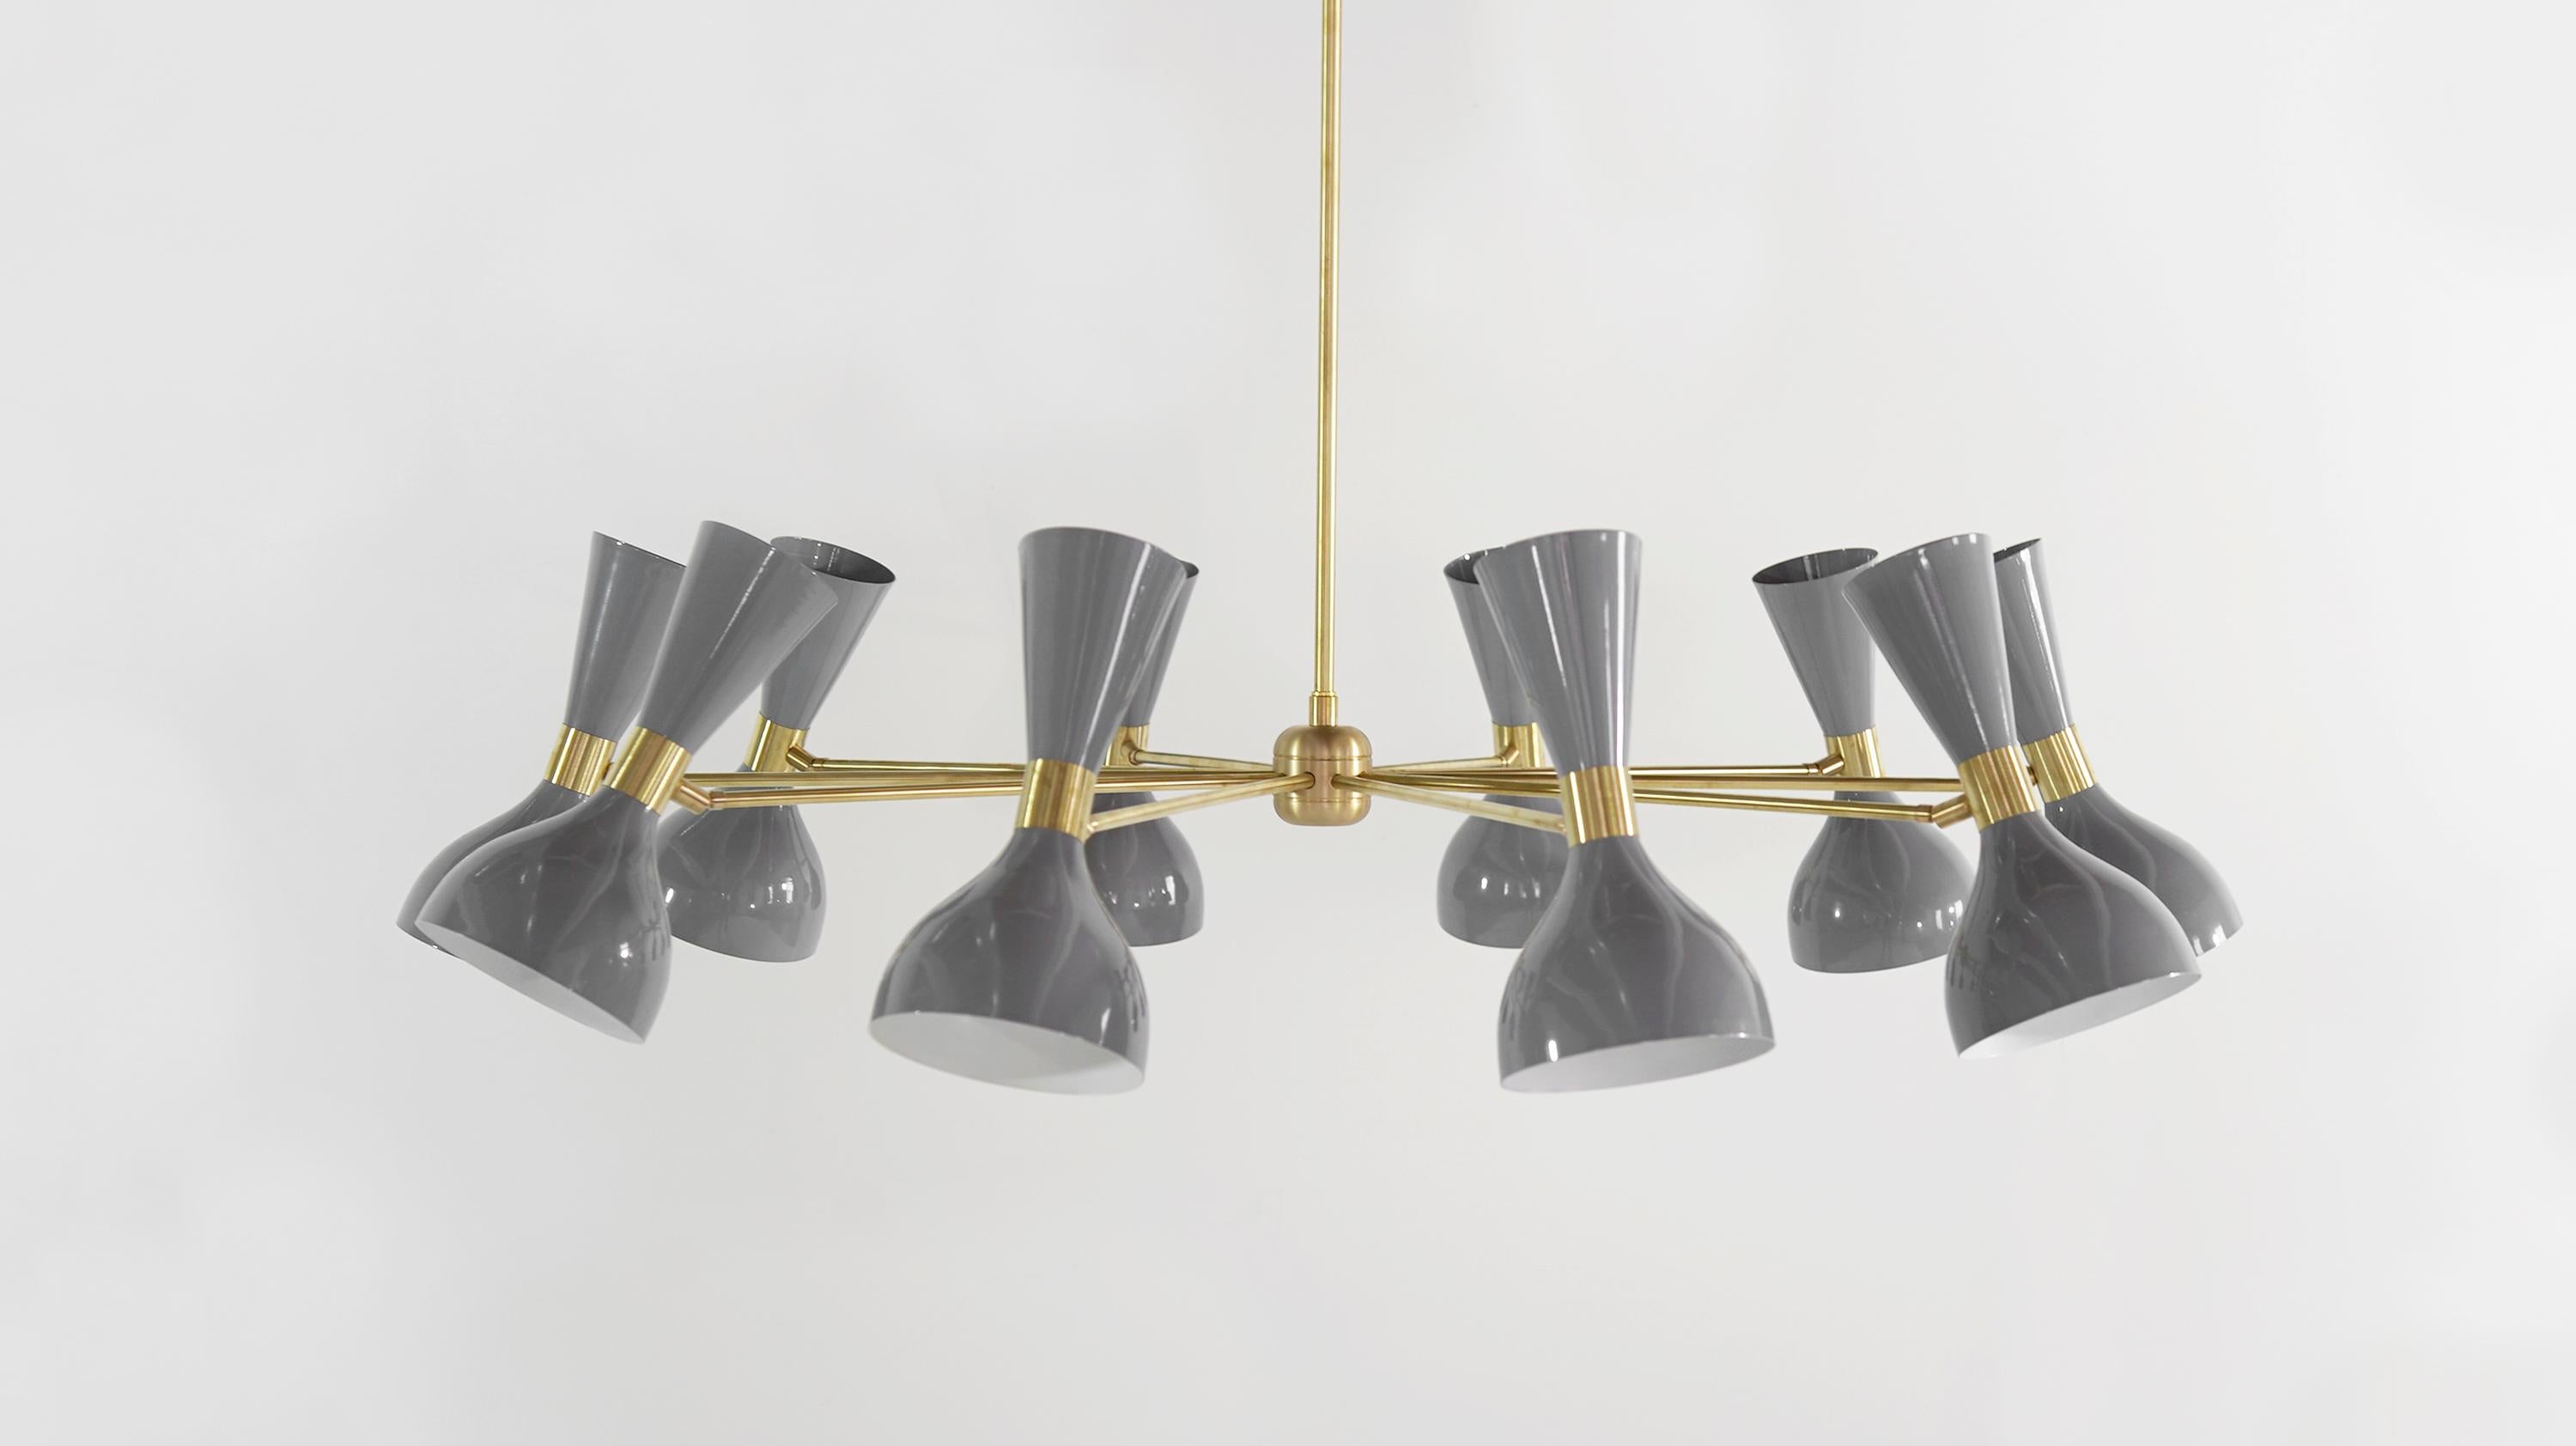 Ludo: an exercise in playful modernism. The large 10-arm round Ludo chandelier proves that good design doesn't have to be so serious! The spun aluminum shades are an iconic vintage mid-century Italian design, while the over-scaled brass band is a